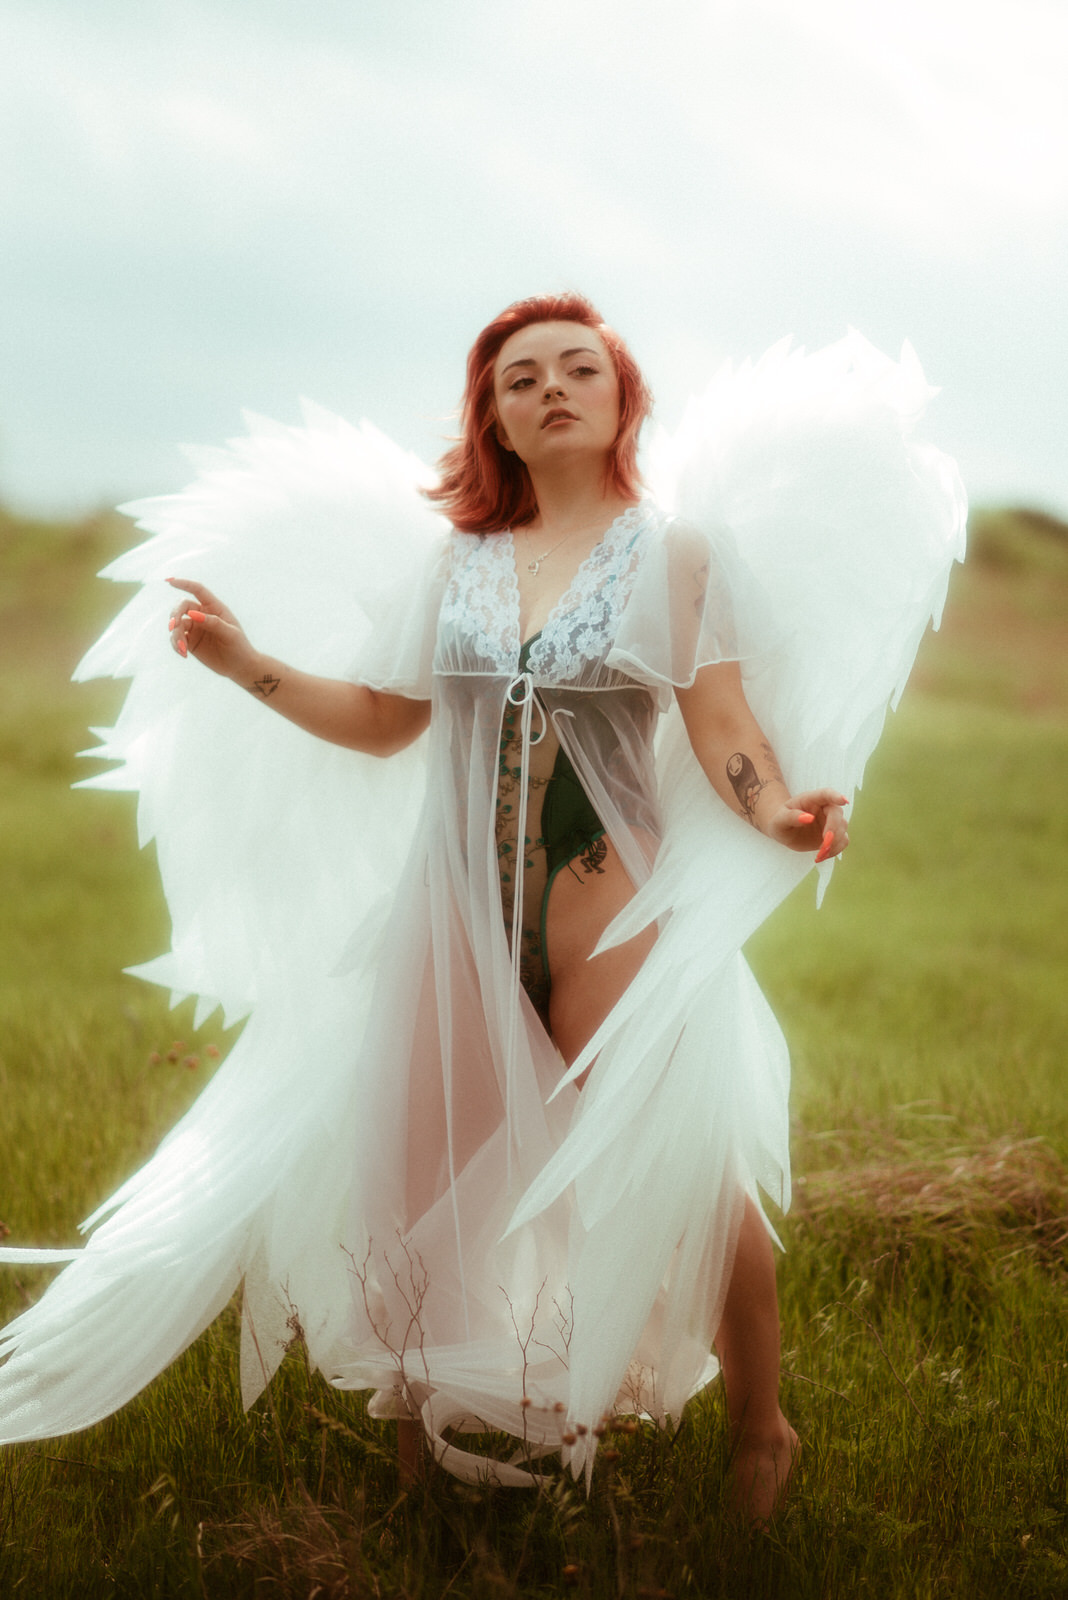 Boudoir photos with large angel wings by Royal Lune Photo in DFW